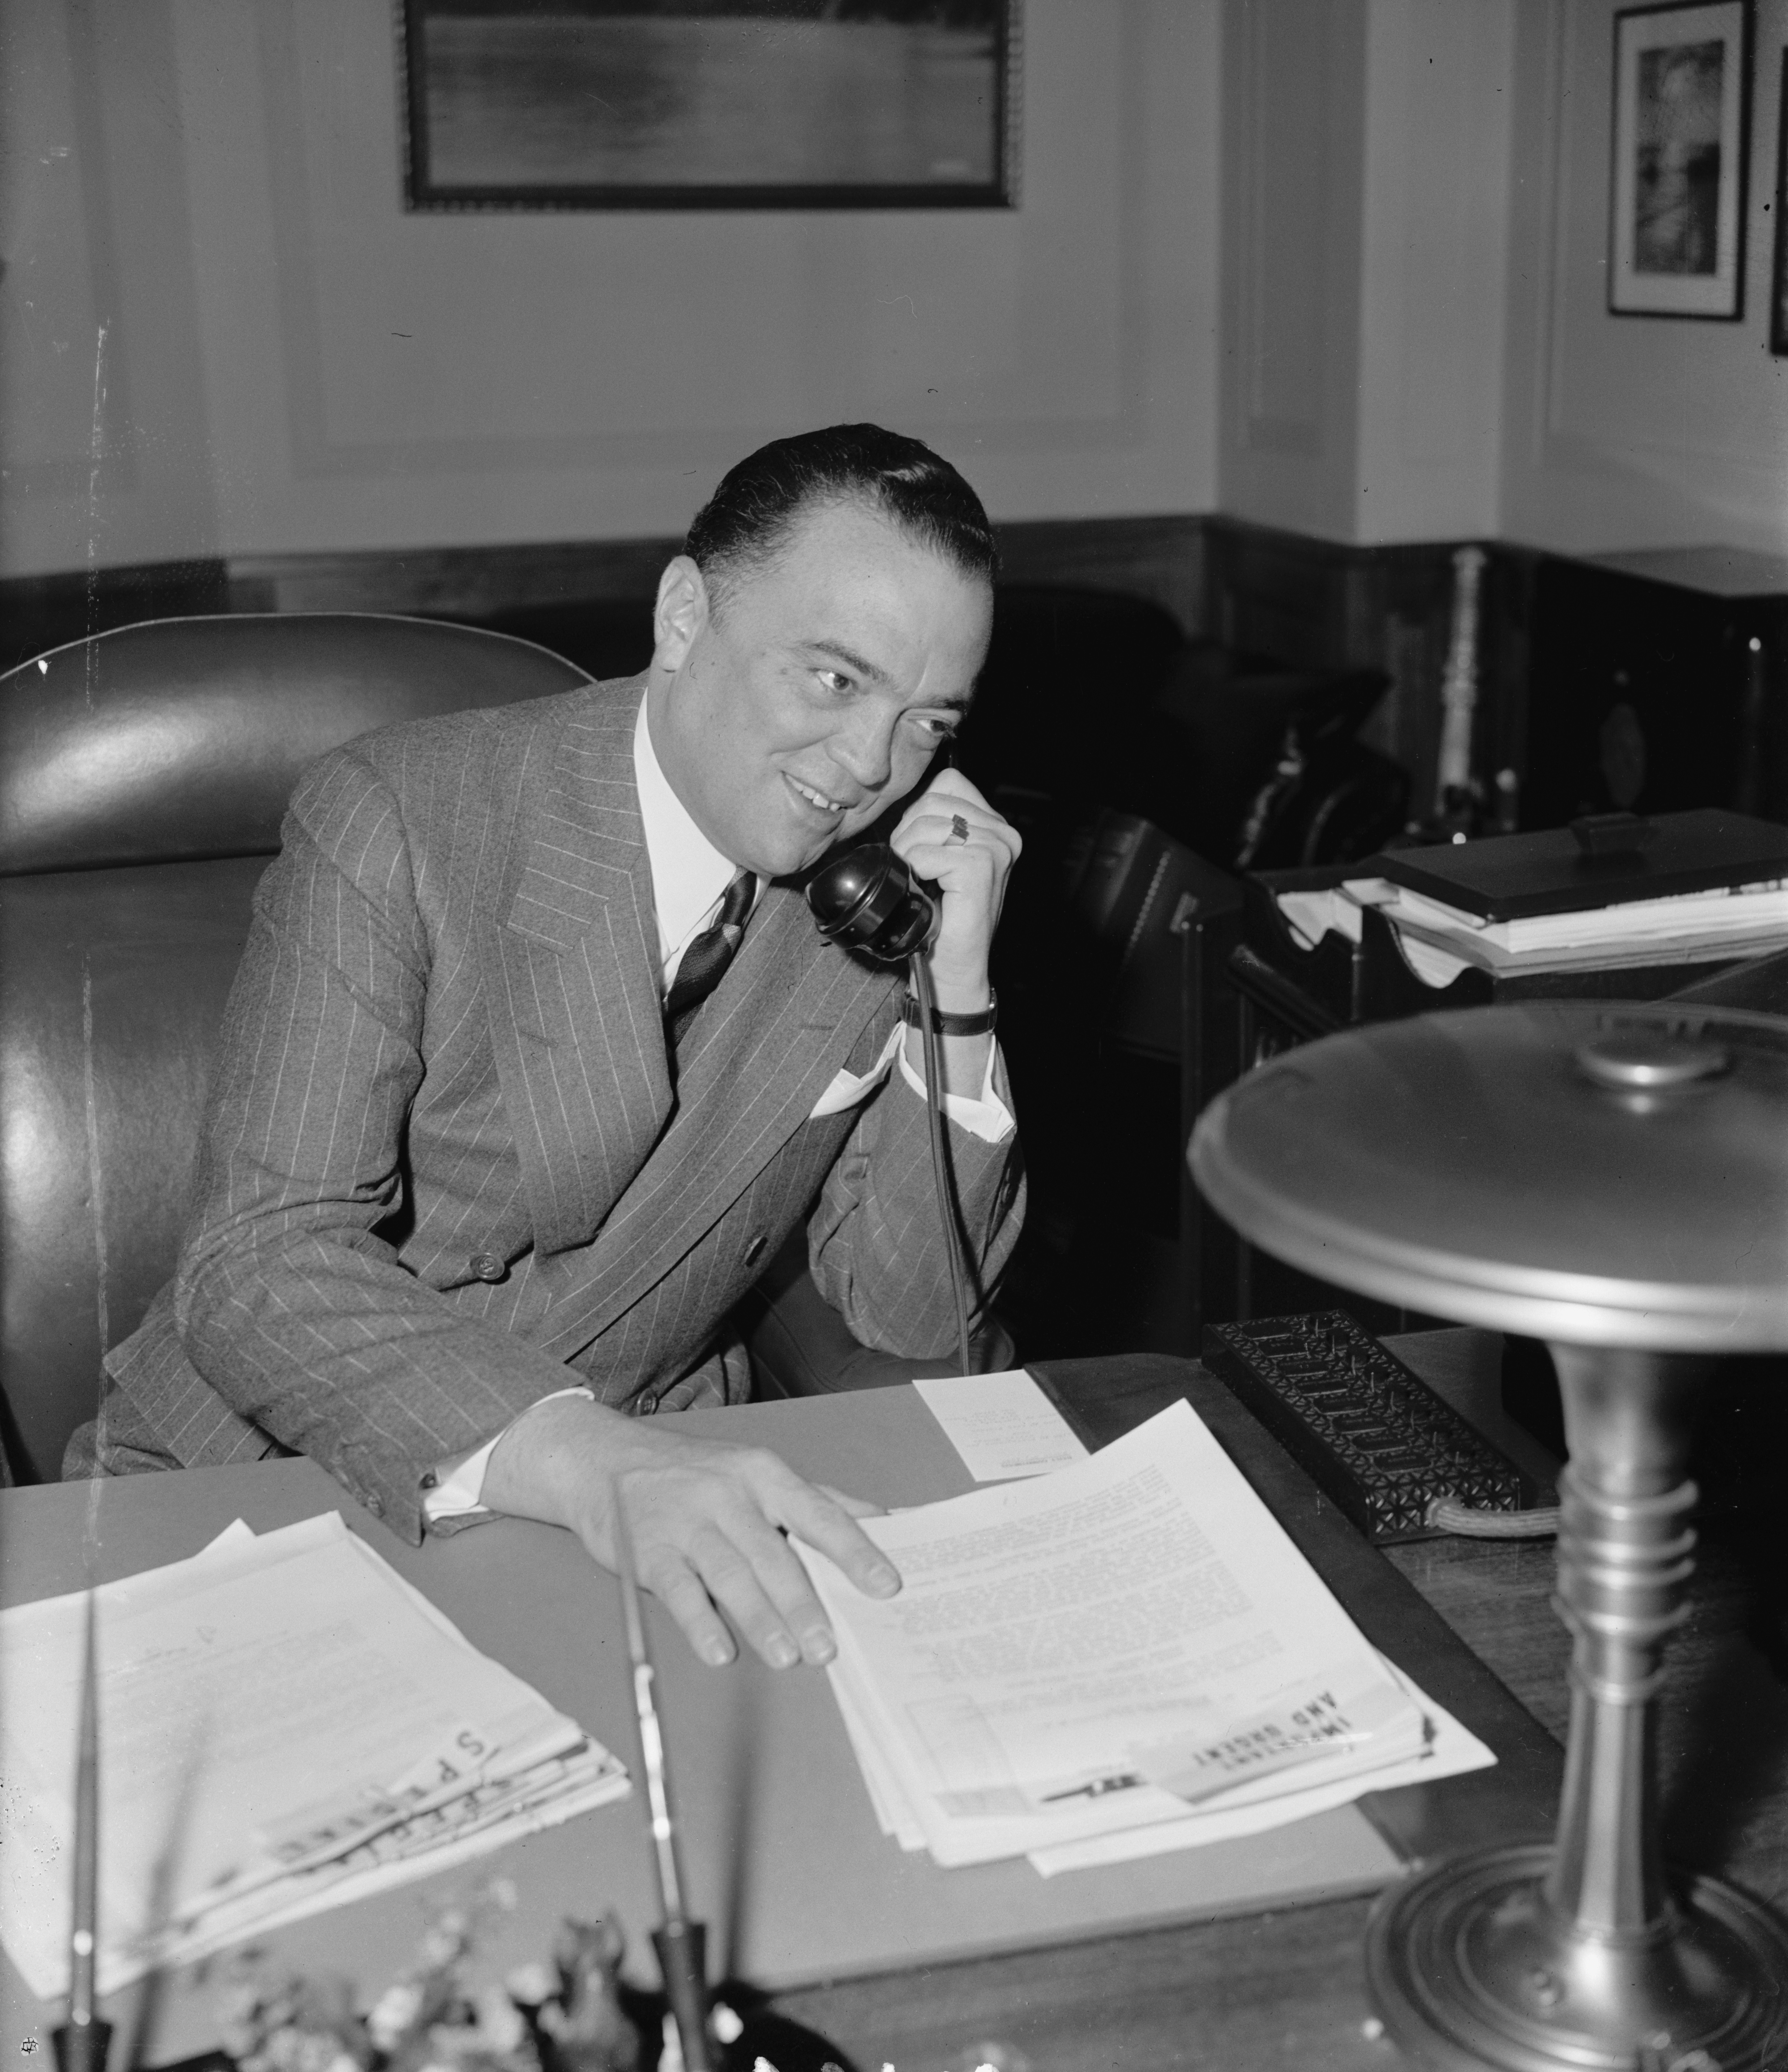 J. Edgar Hoover in his office, Washington DC, United States, 5 Apr 1940